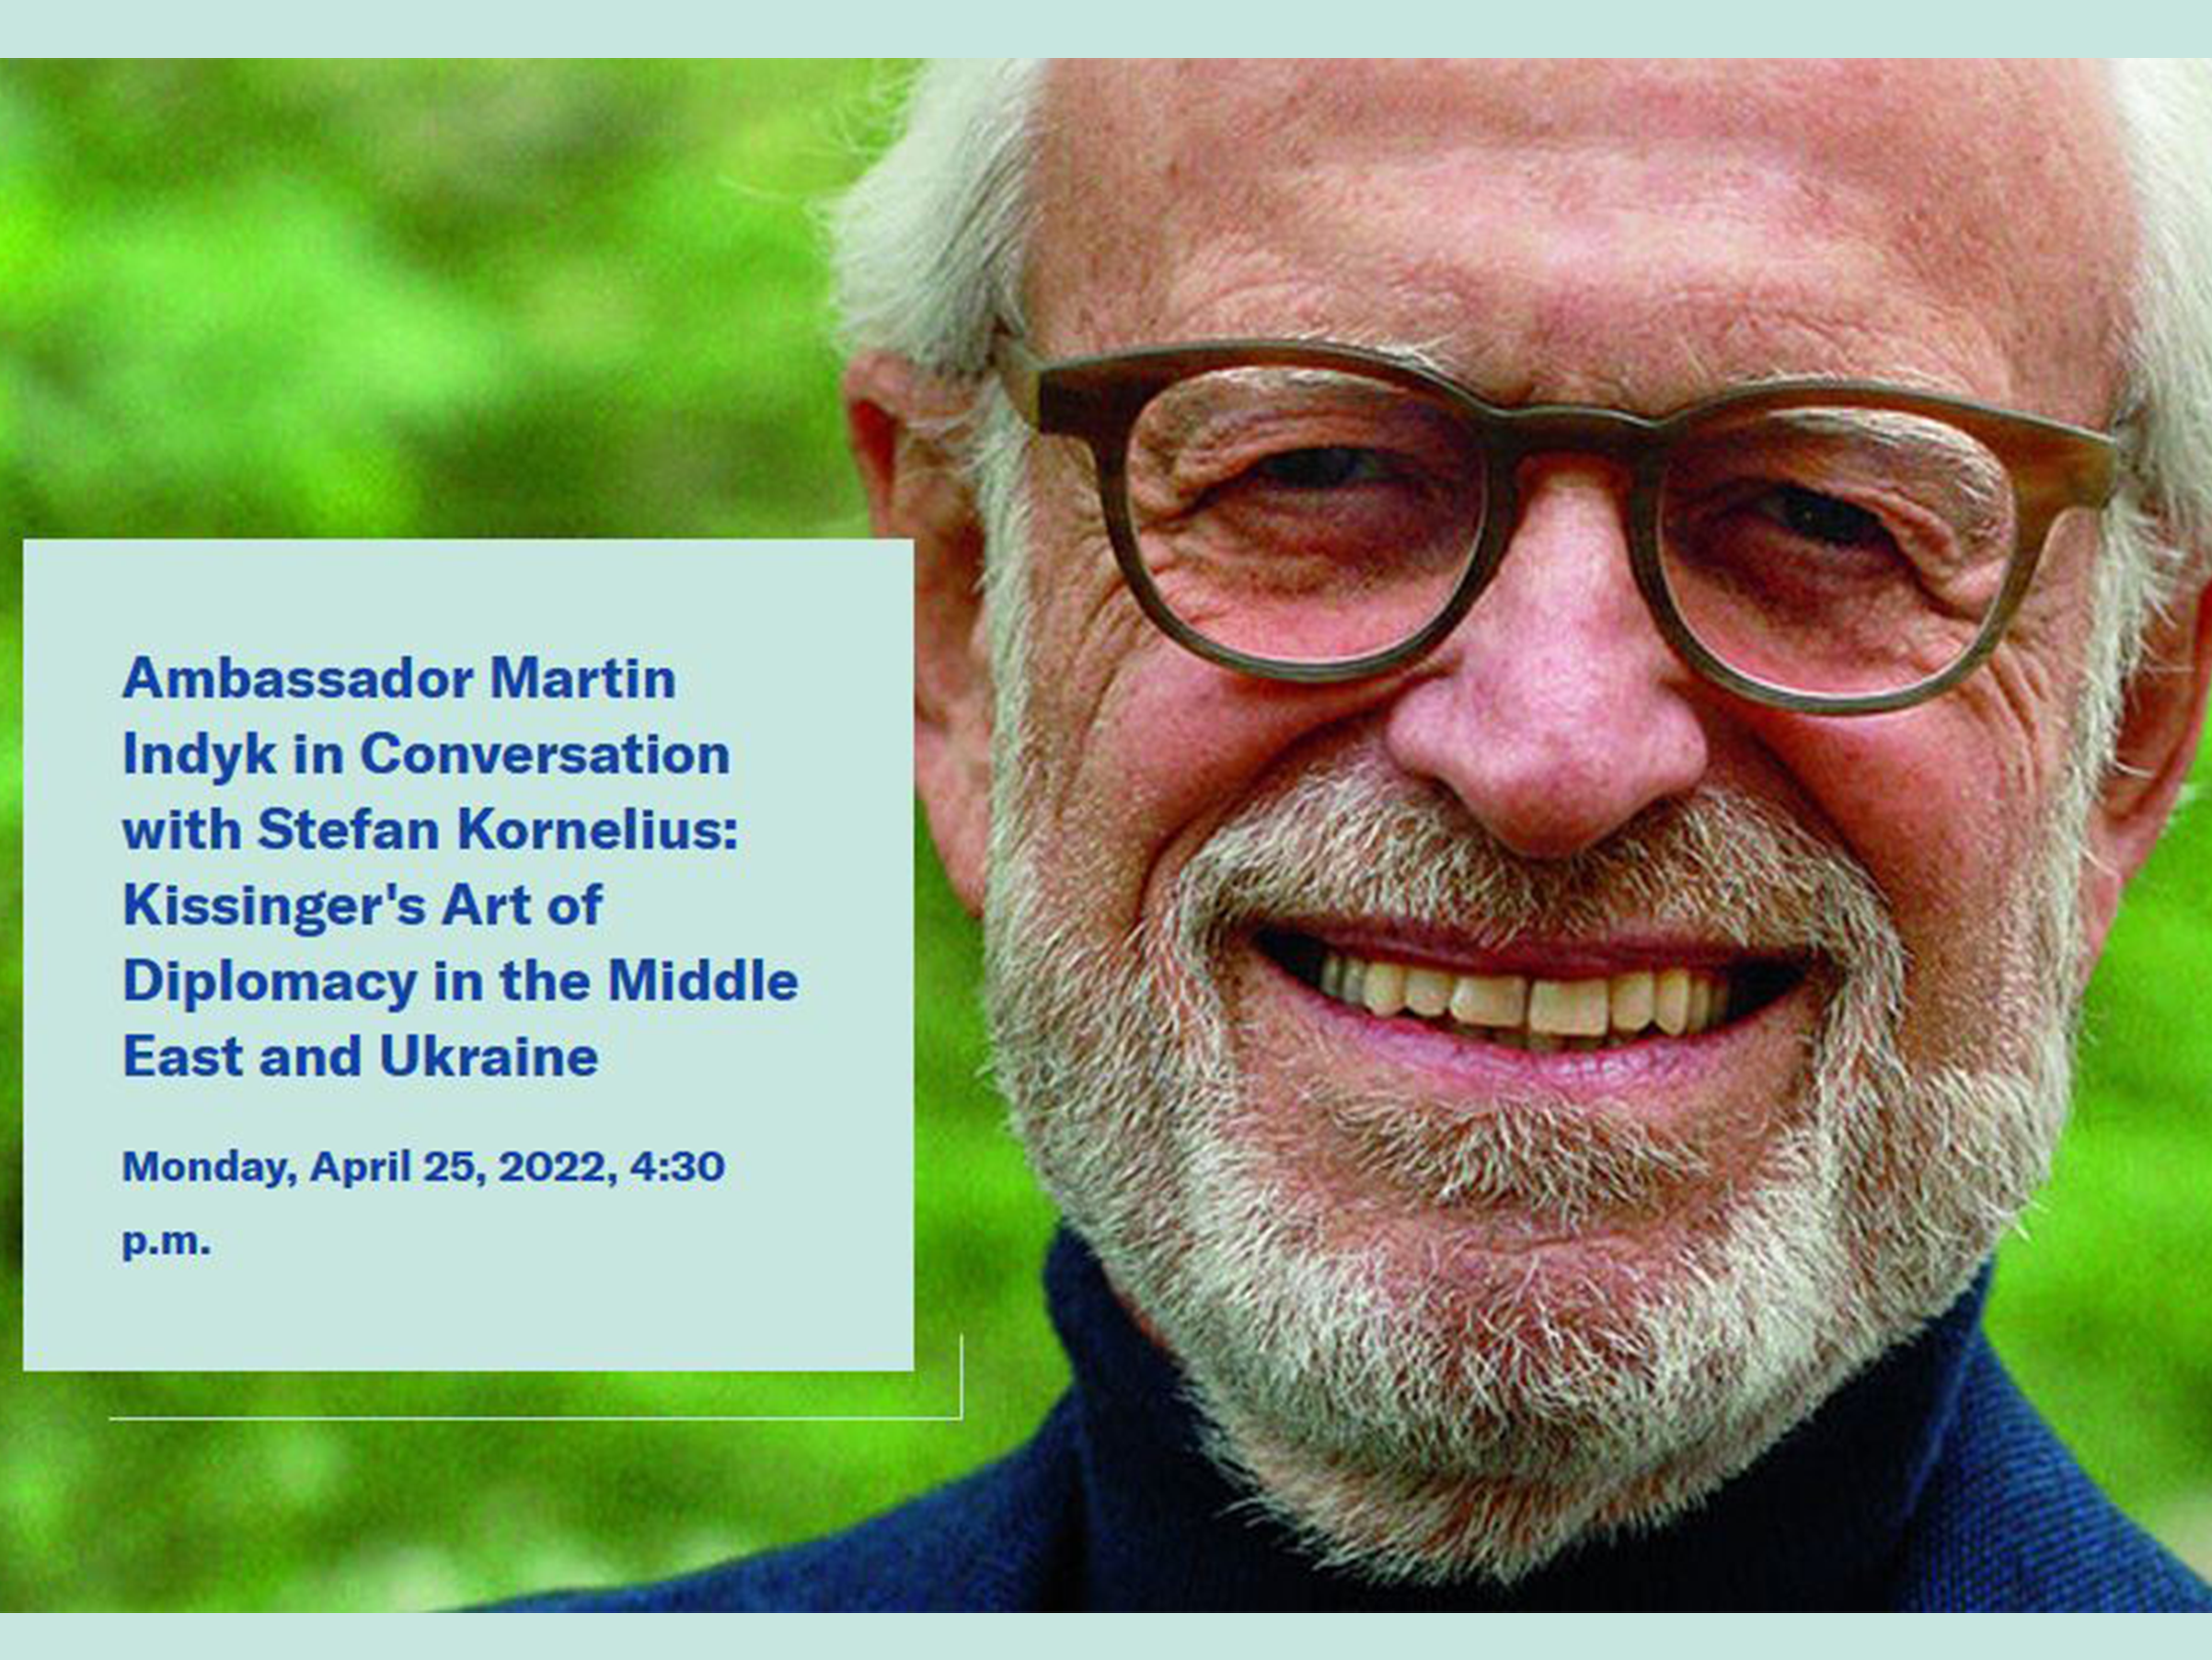 Ambassador Martin Indyk in Conversation with Stefan Kornelius: Kissinger’s Art of Diplomacy in the Middle East and Ukraine